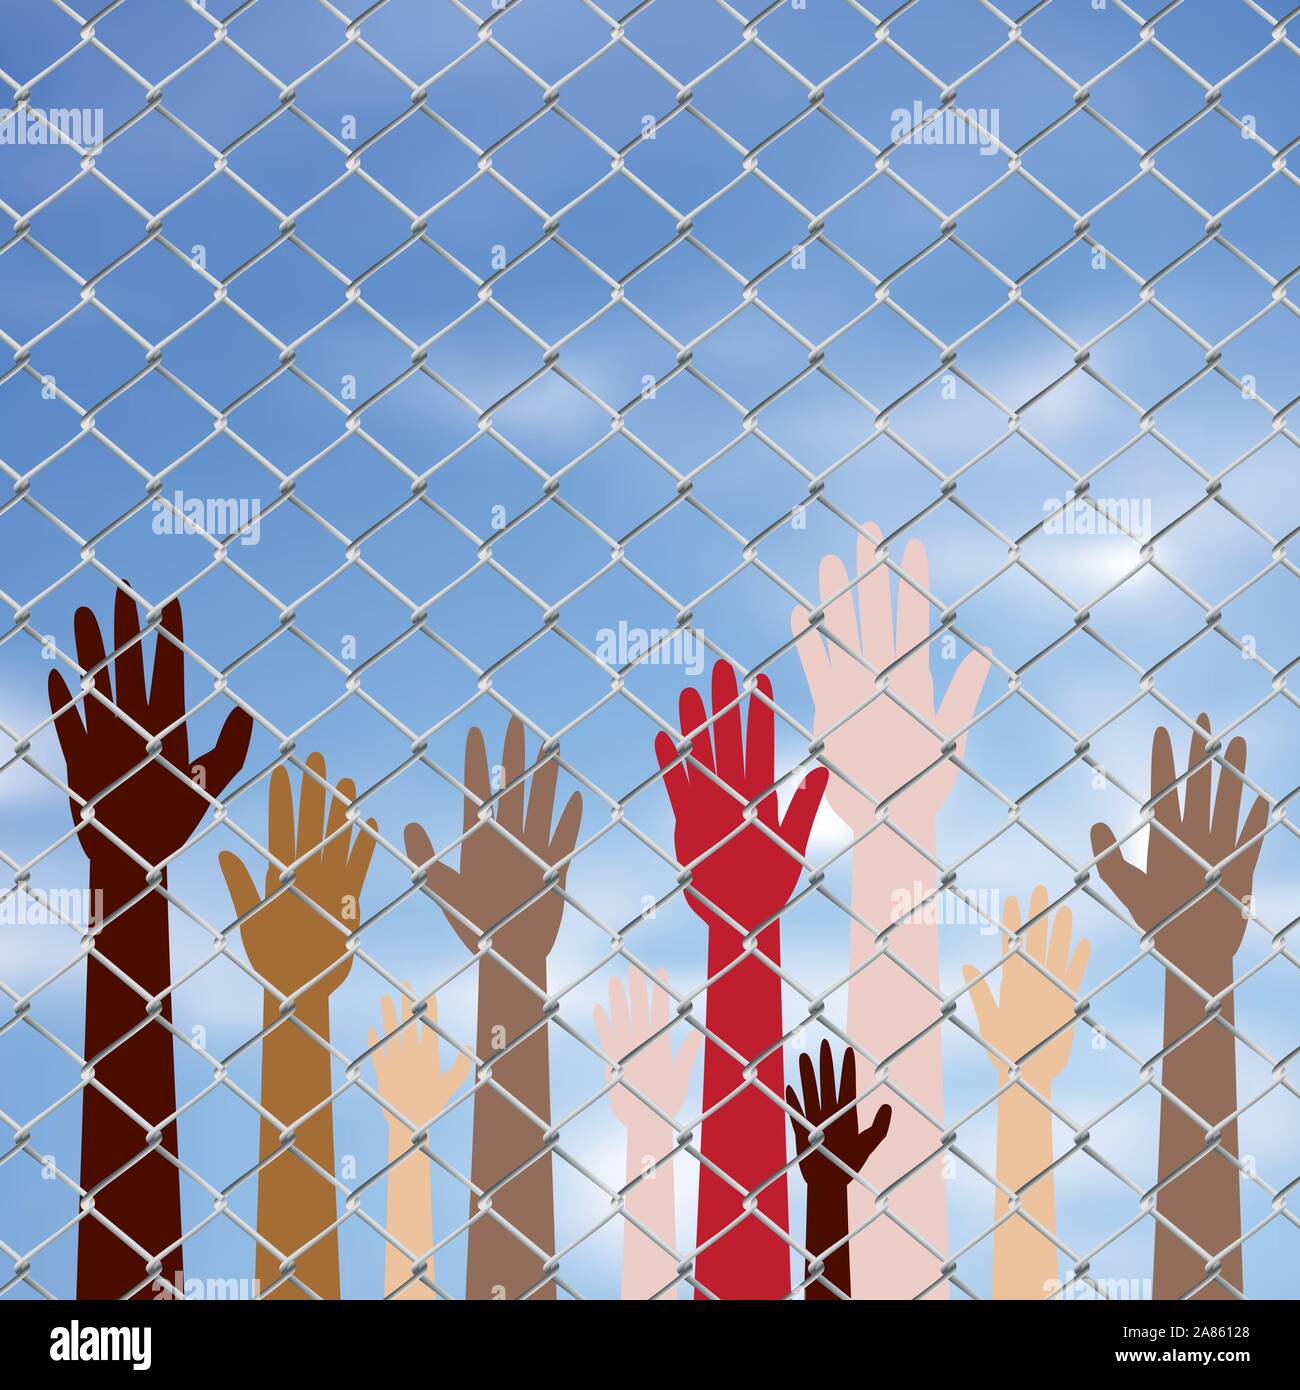 Diversity hand silhouettes behind metal wire fence against blurry sky background. Stock Vector